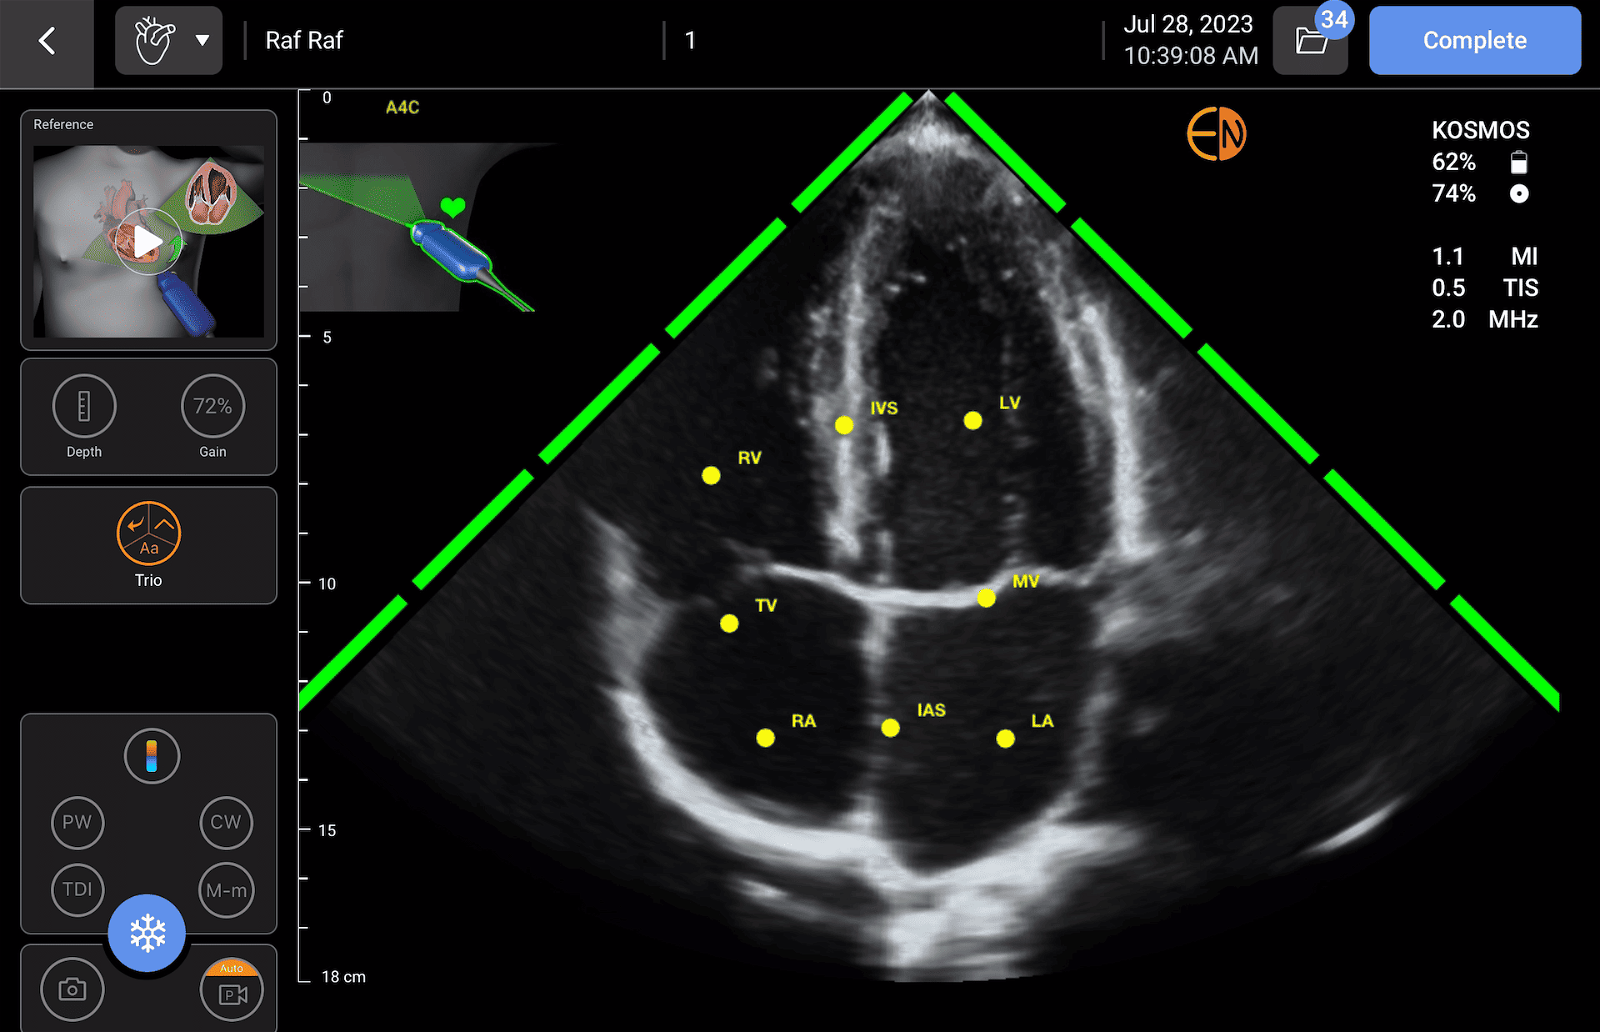 Kosmos Trio- automated guidance, grading, and labeling of cardiac anatomy